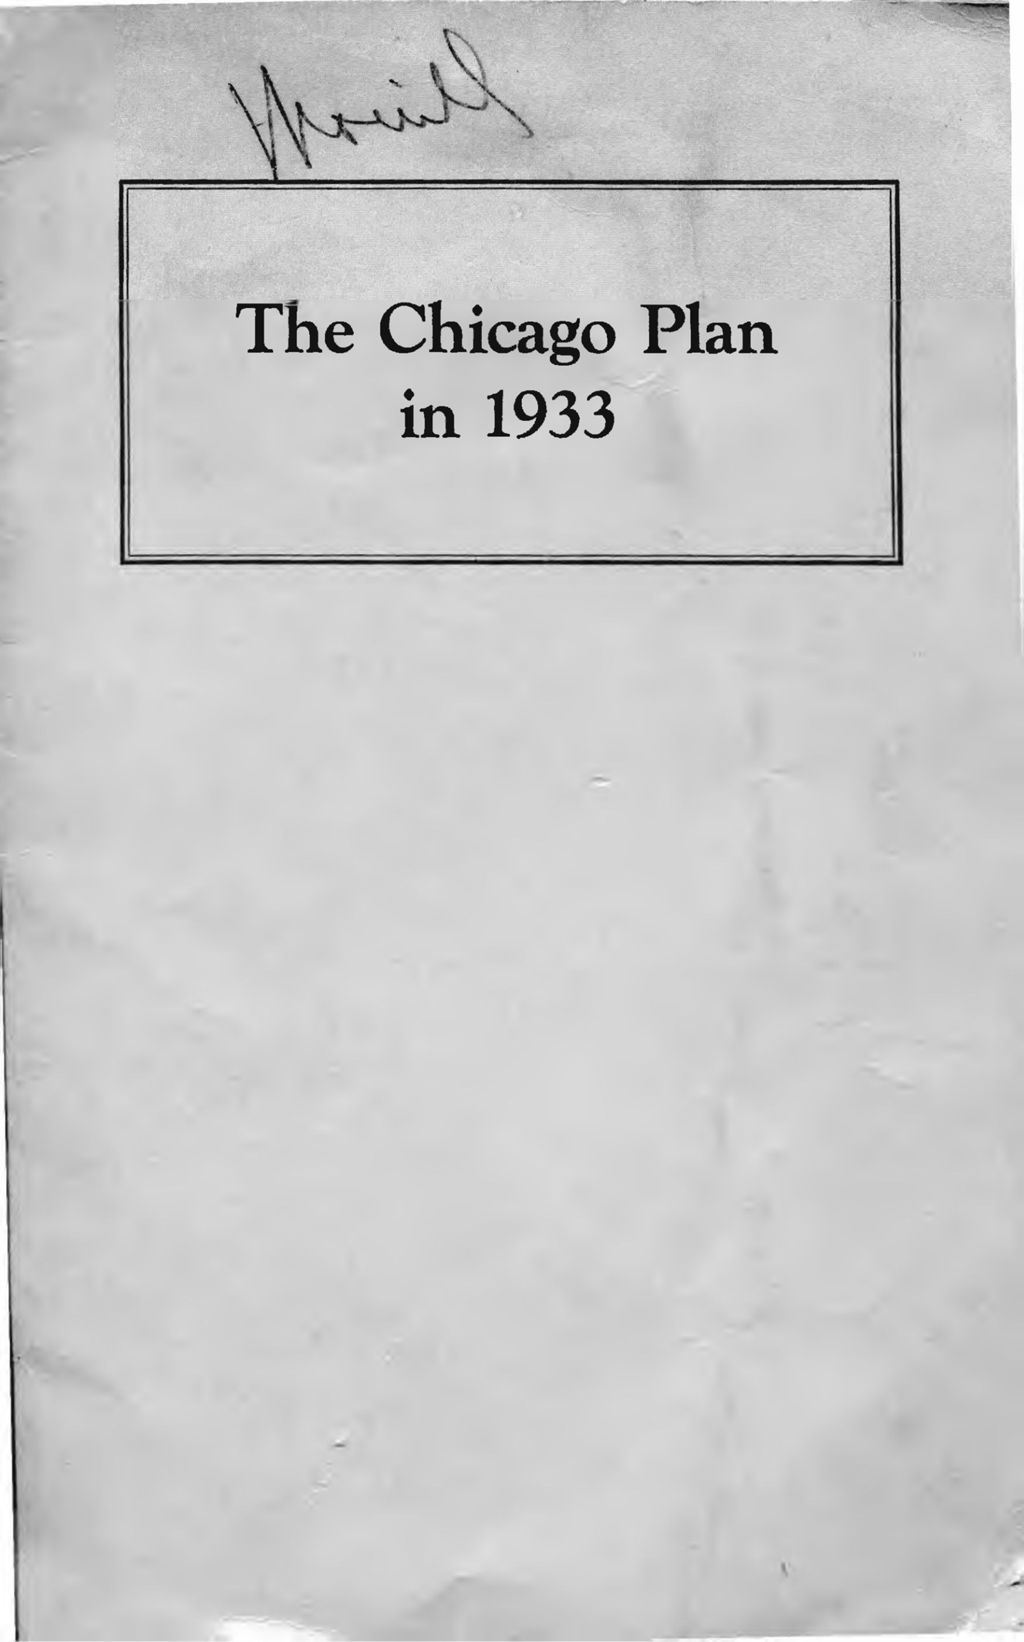 Miniature of The Chicago Plan, 1933